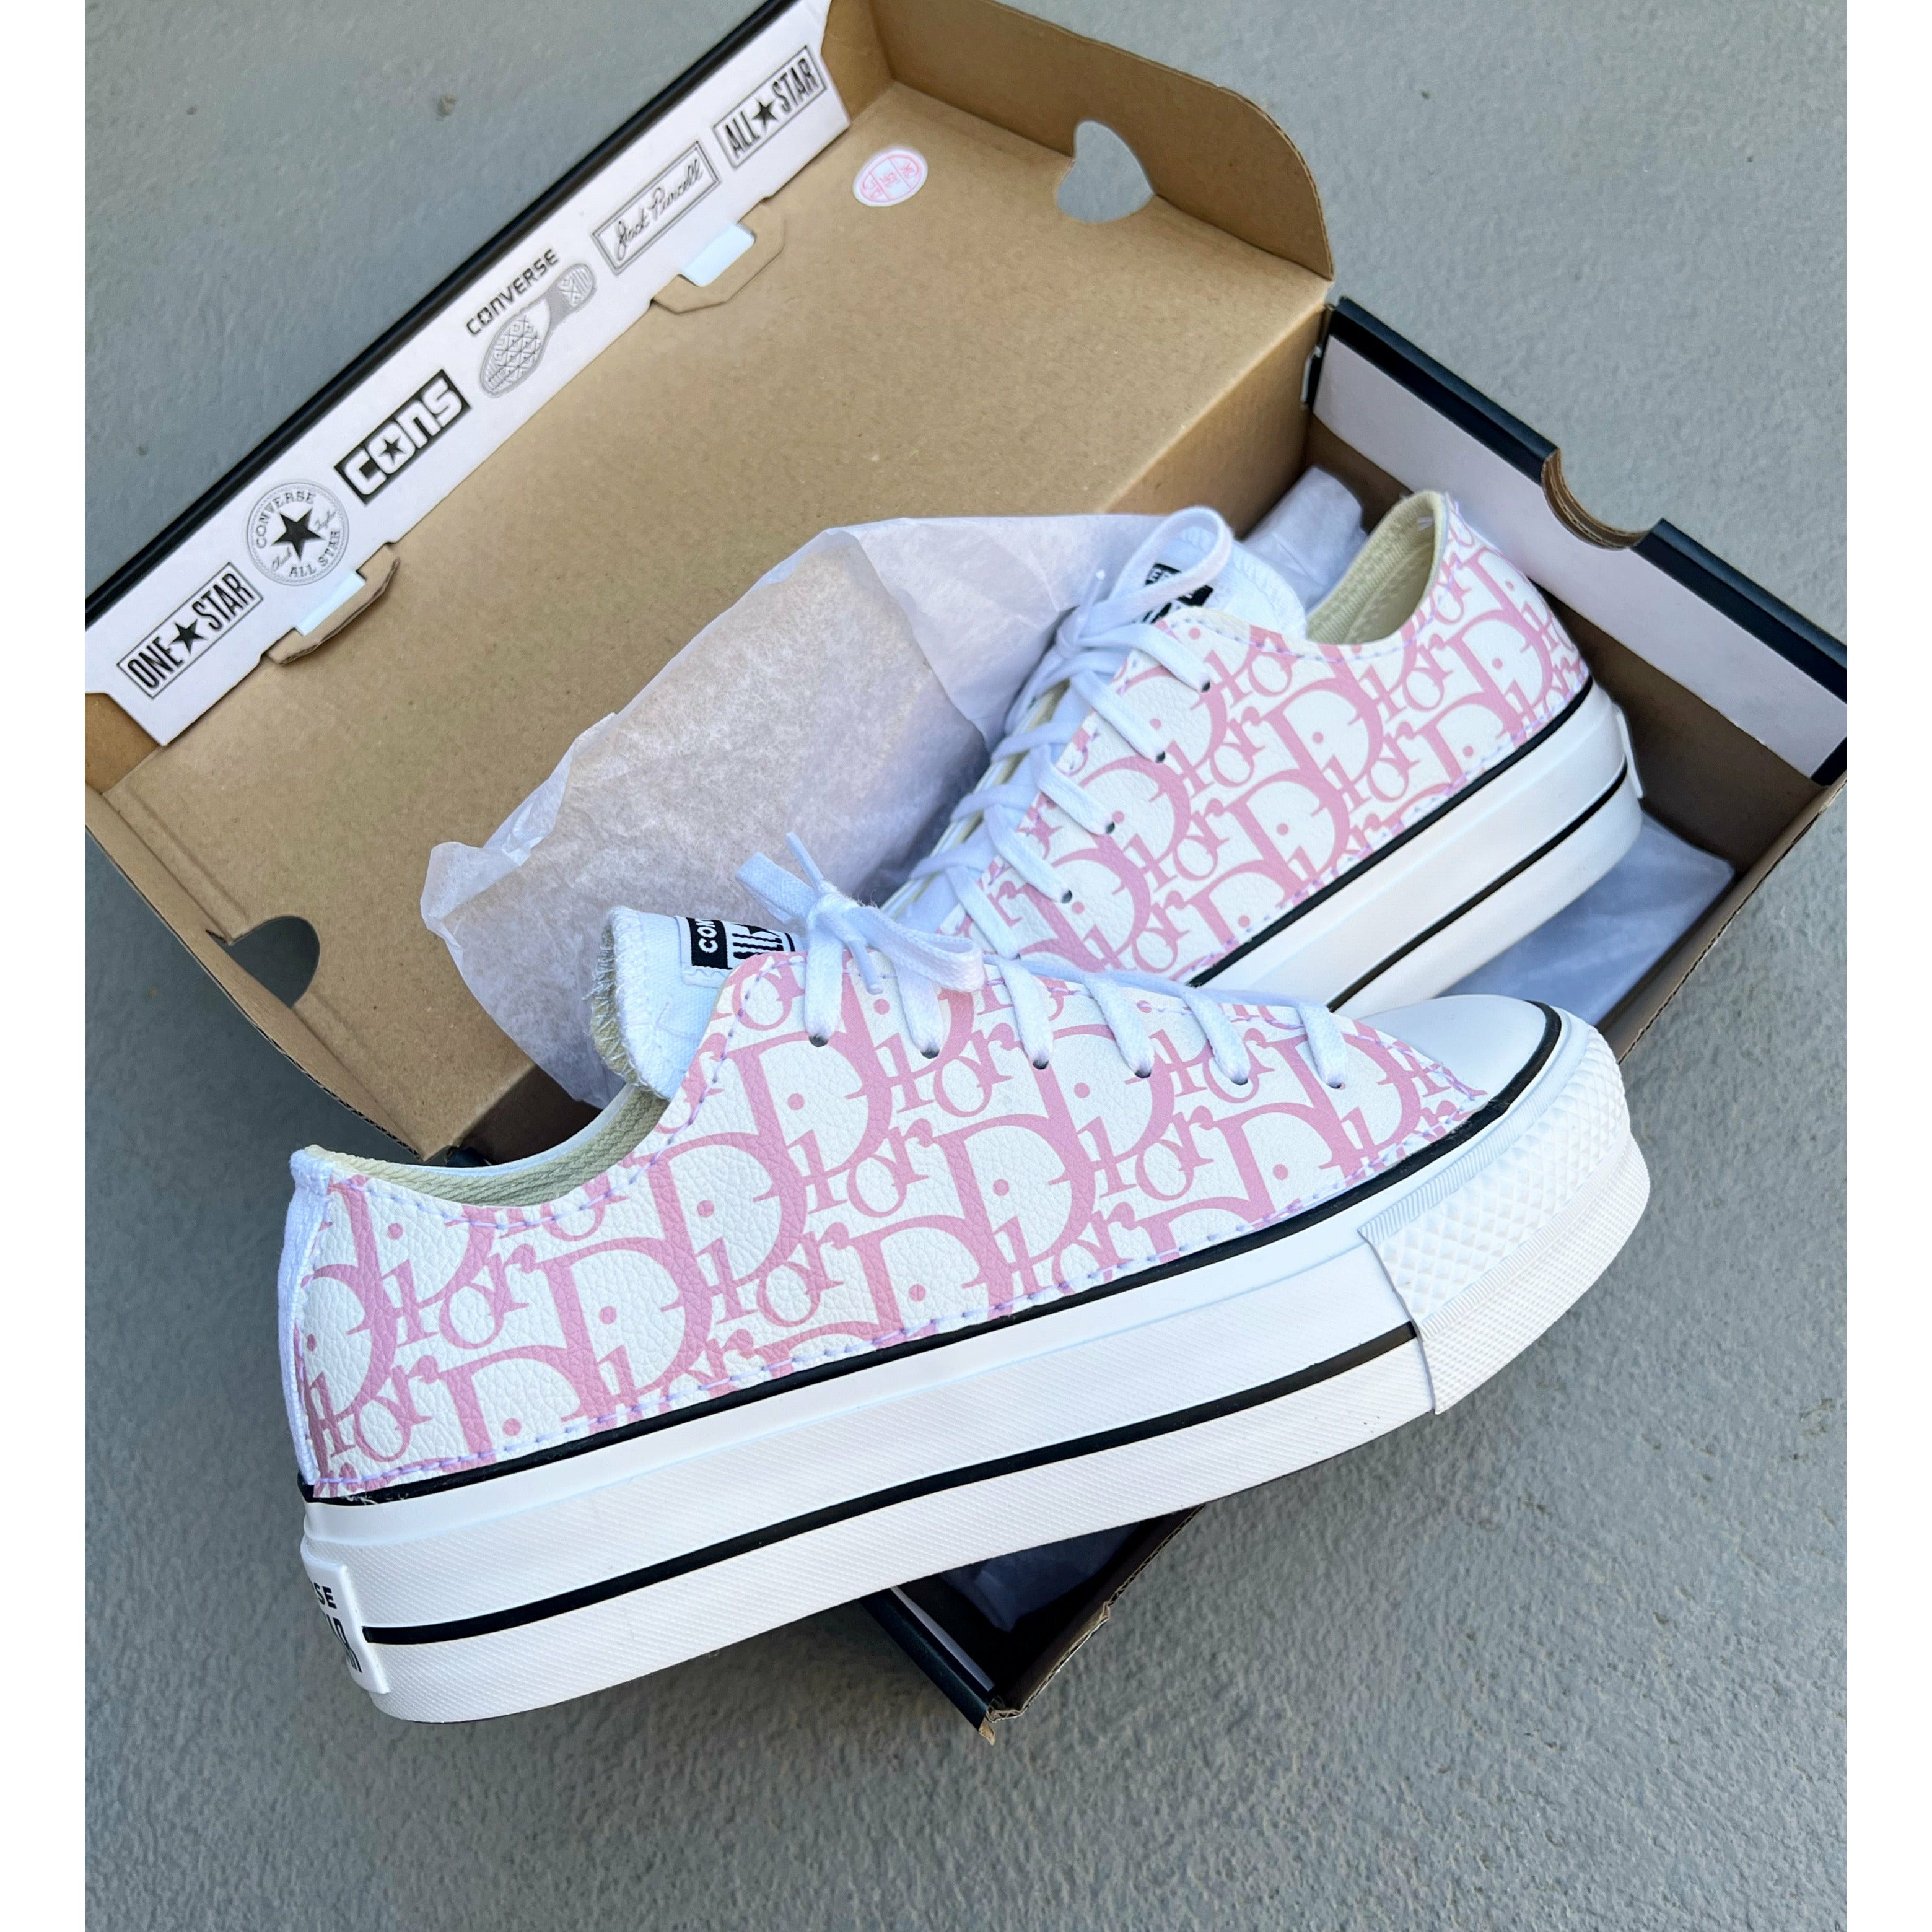 Pastel Luis Converse! available now 🔗 www.wavycreationz.com